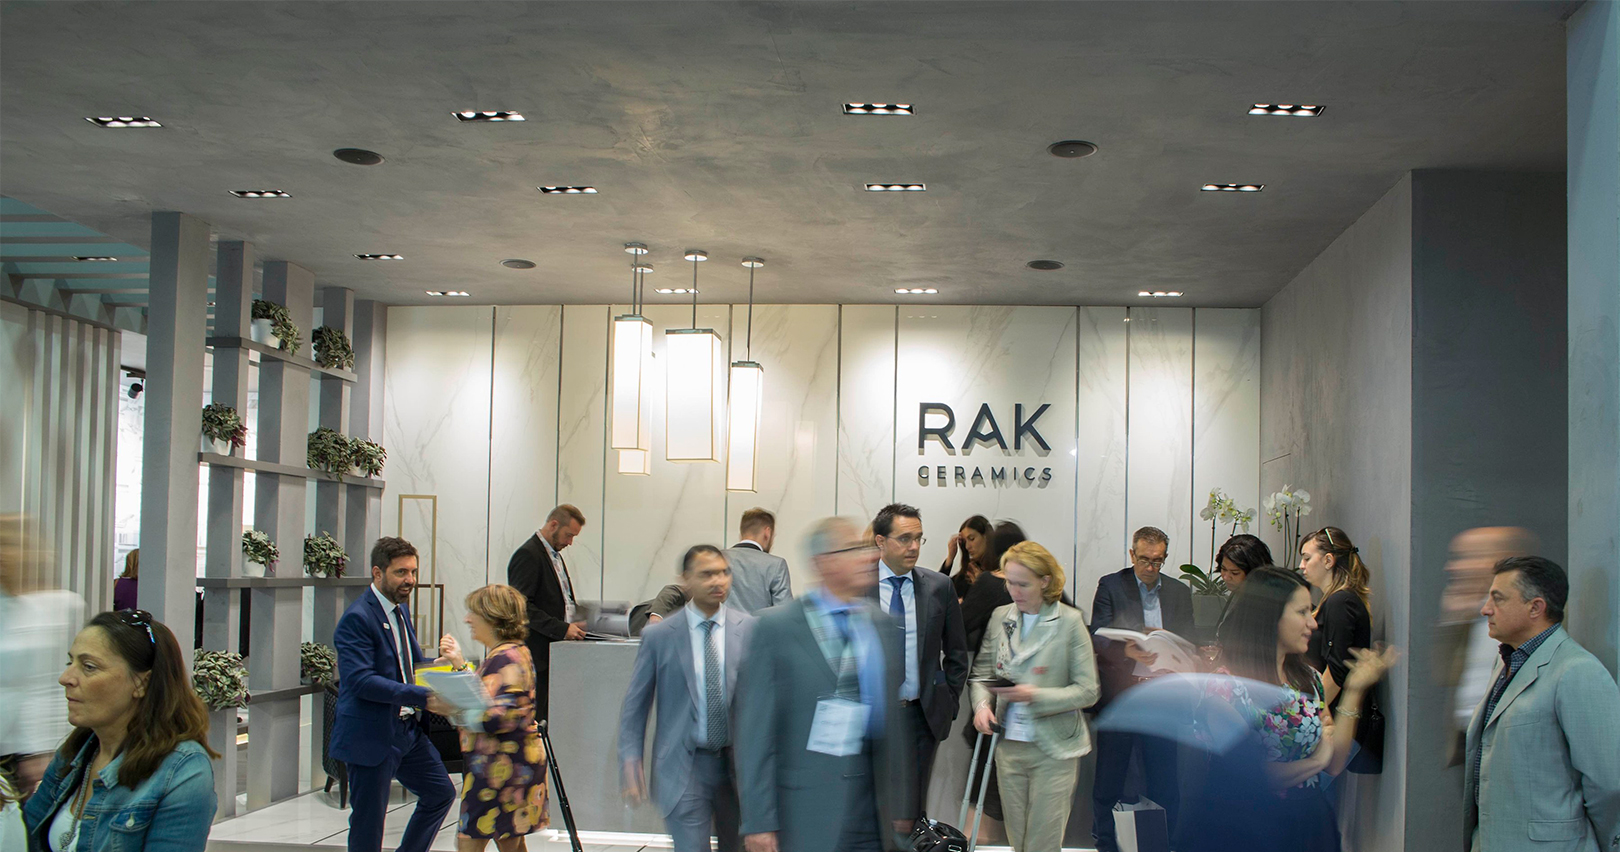 Leading ceramics company unveils new global brand identity at Cersaie.